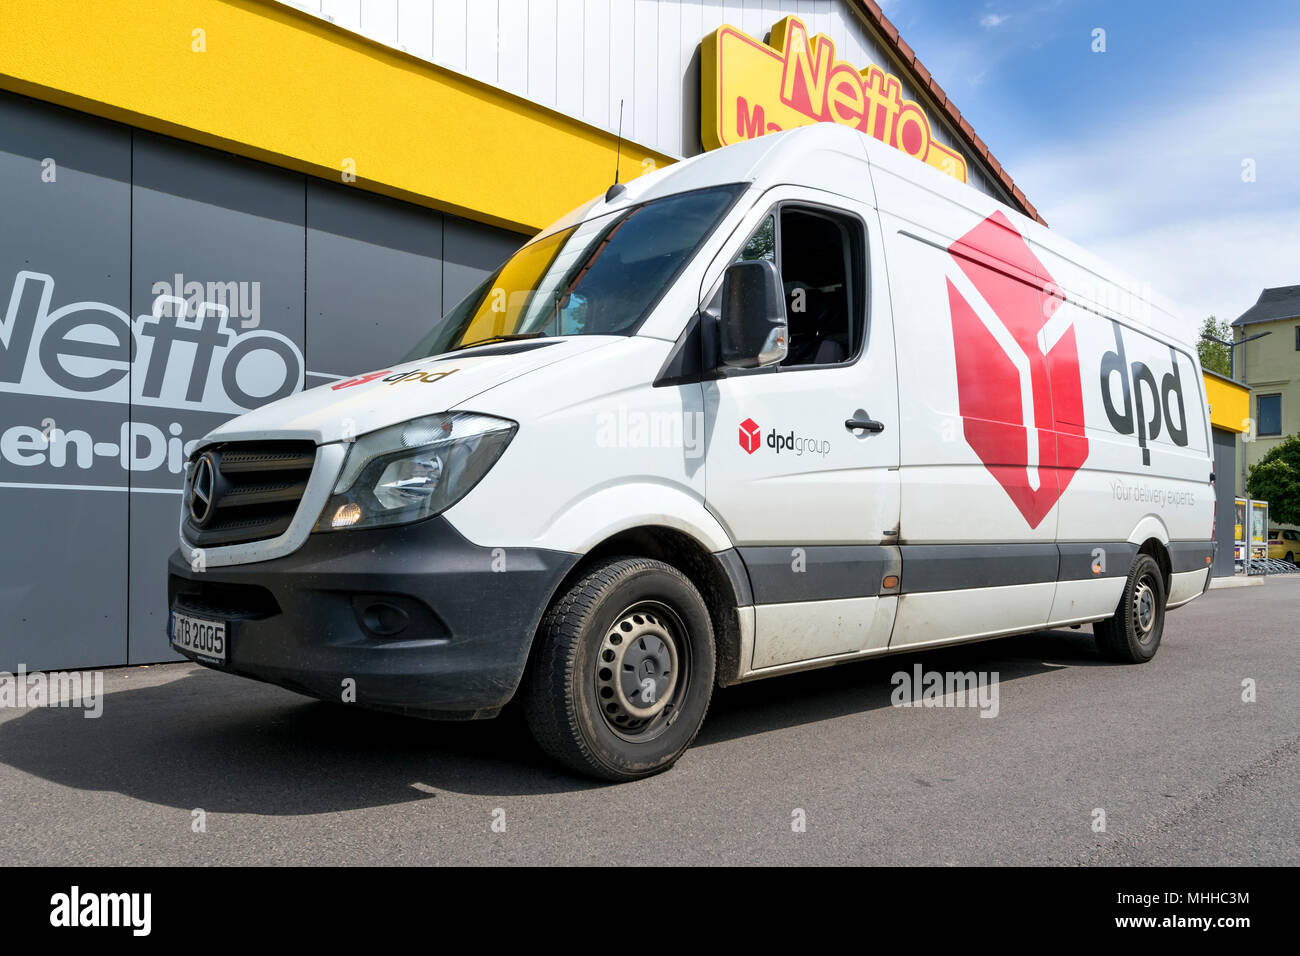 dpd delivery van at Netto discount store. DPDgroup is the international parcel delivery network of French state owned postal service, La Poste. Stock Photo